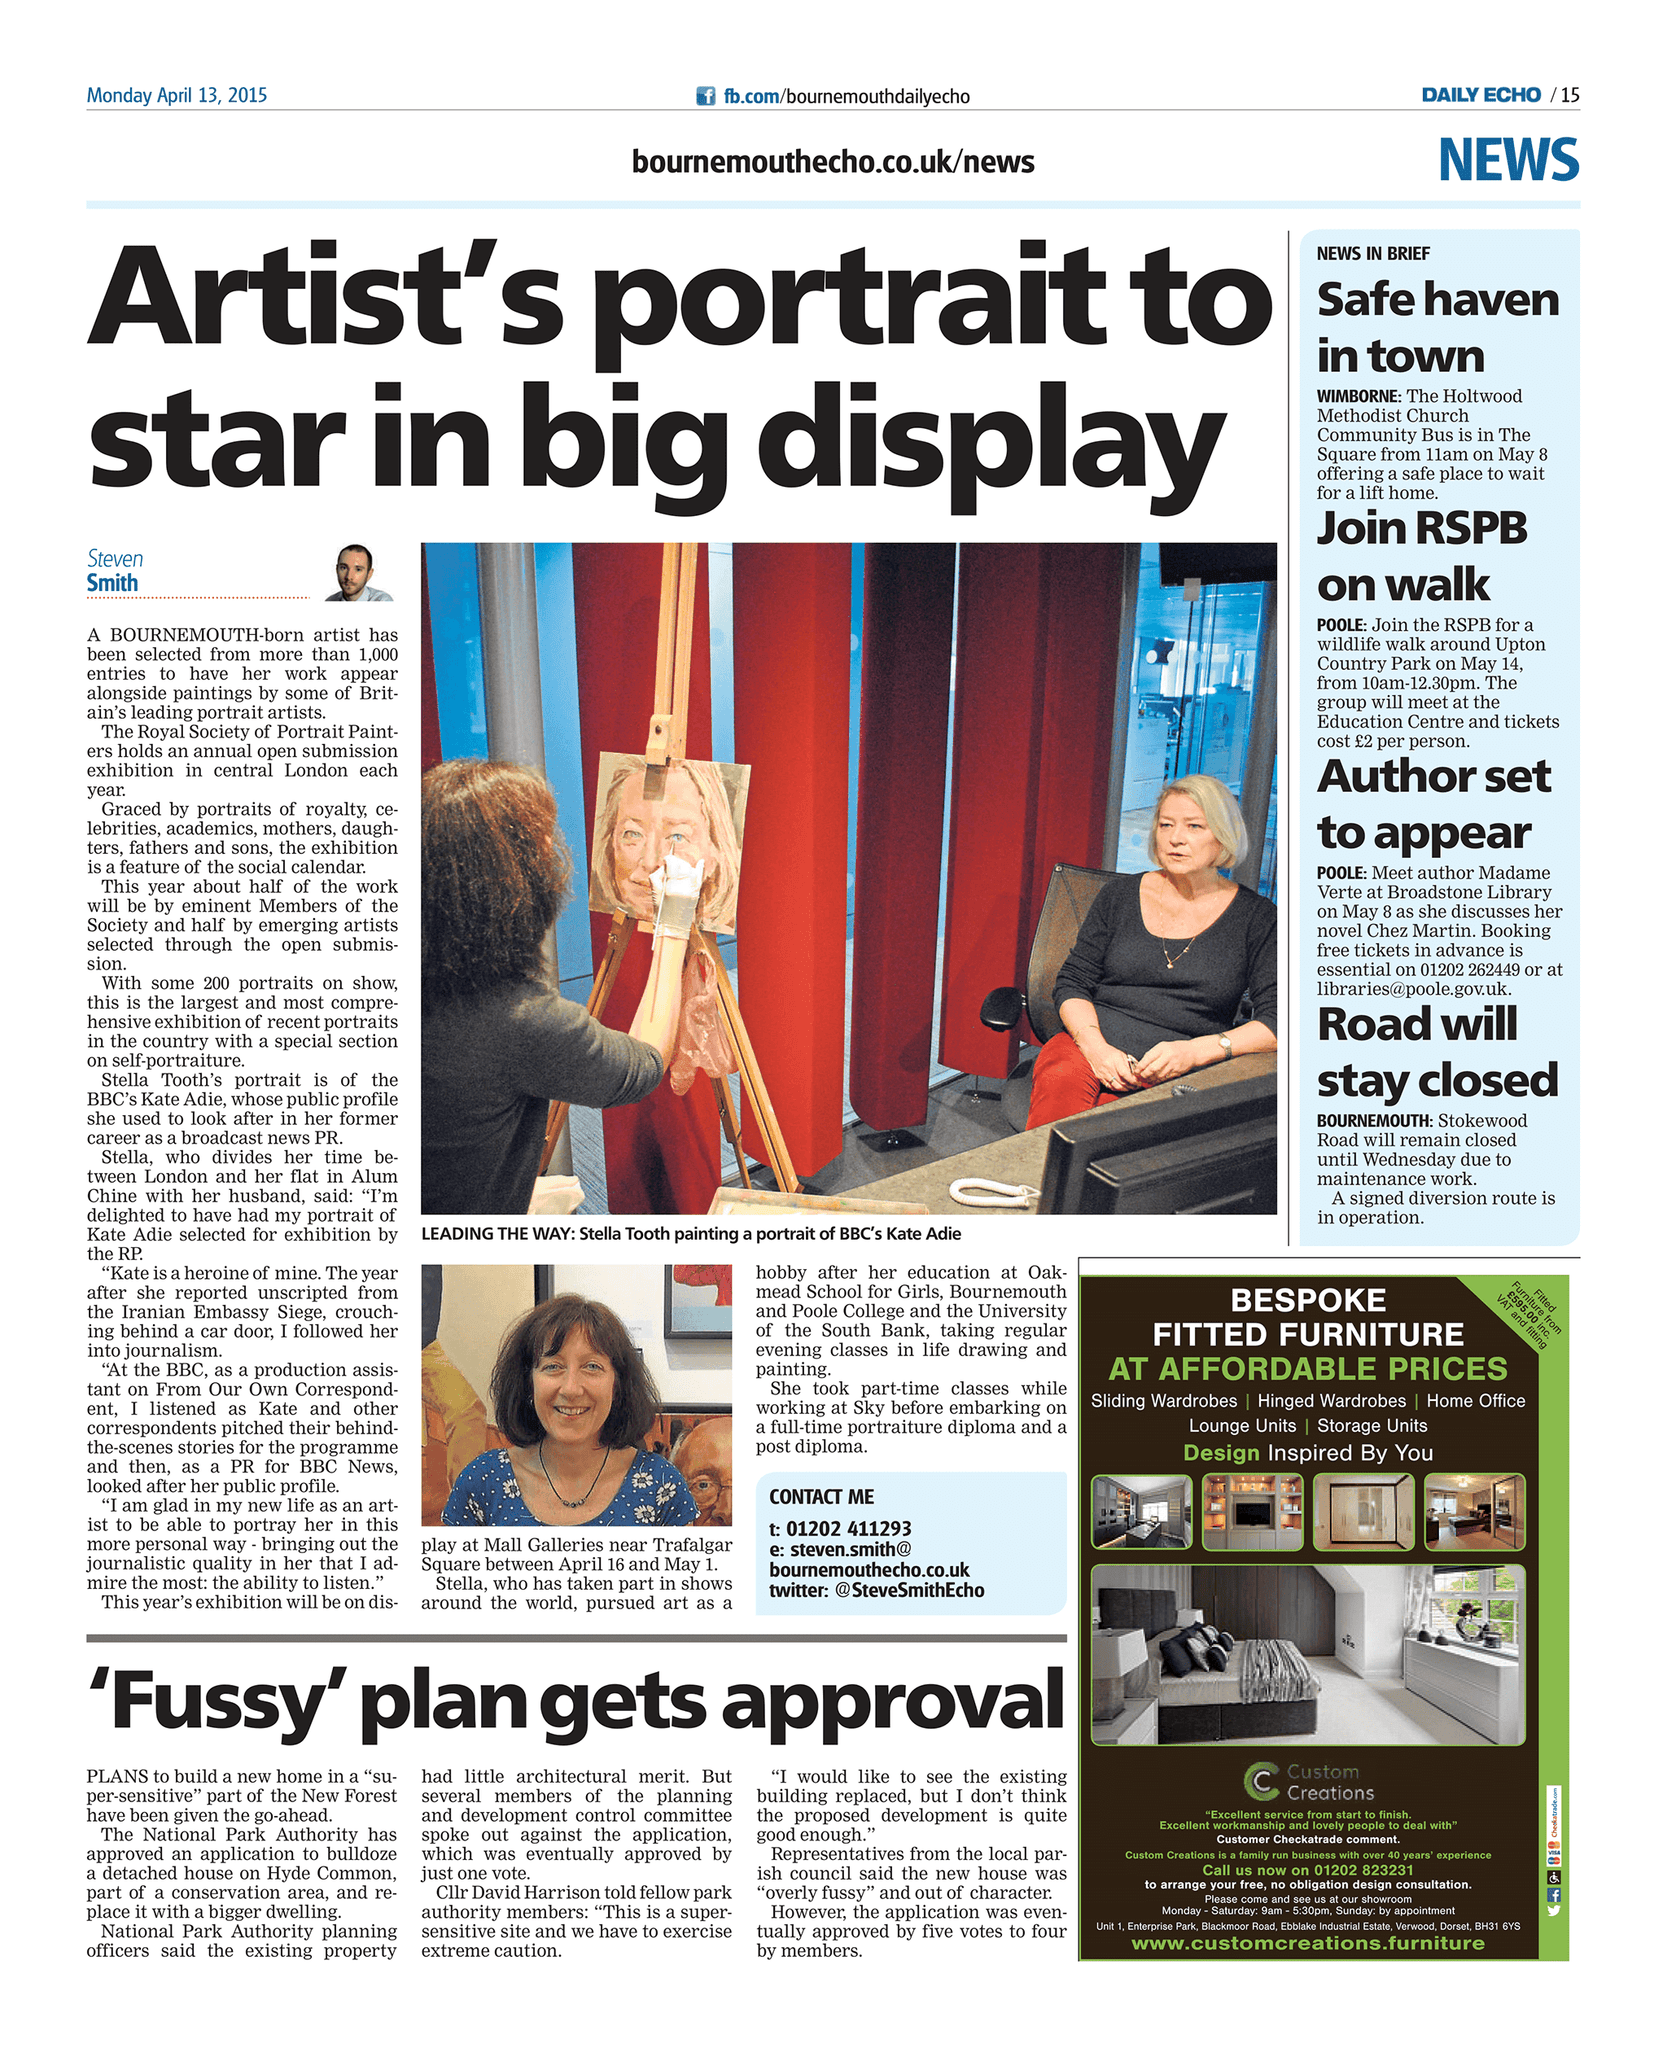 Bournemouth Echo on Kate Adie portrait in Royal Society of Portrait Painters Annual Exhibition 2015 Bournemouth Echo Monday April 13 2015 Artist's portrait to star in big display